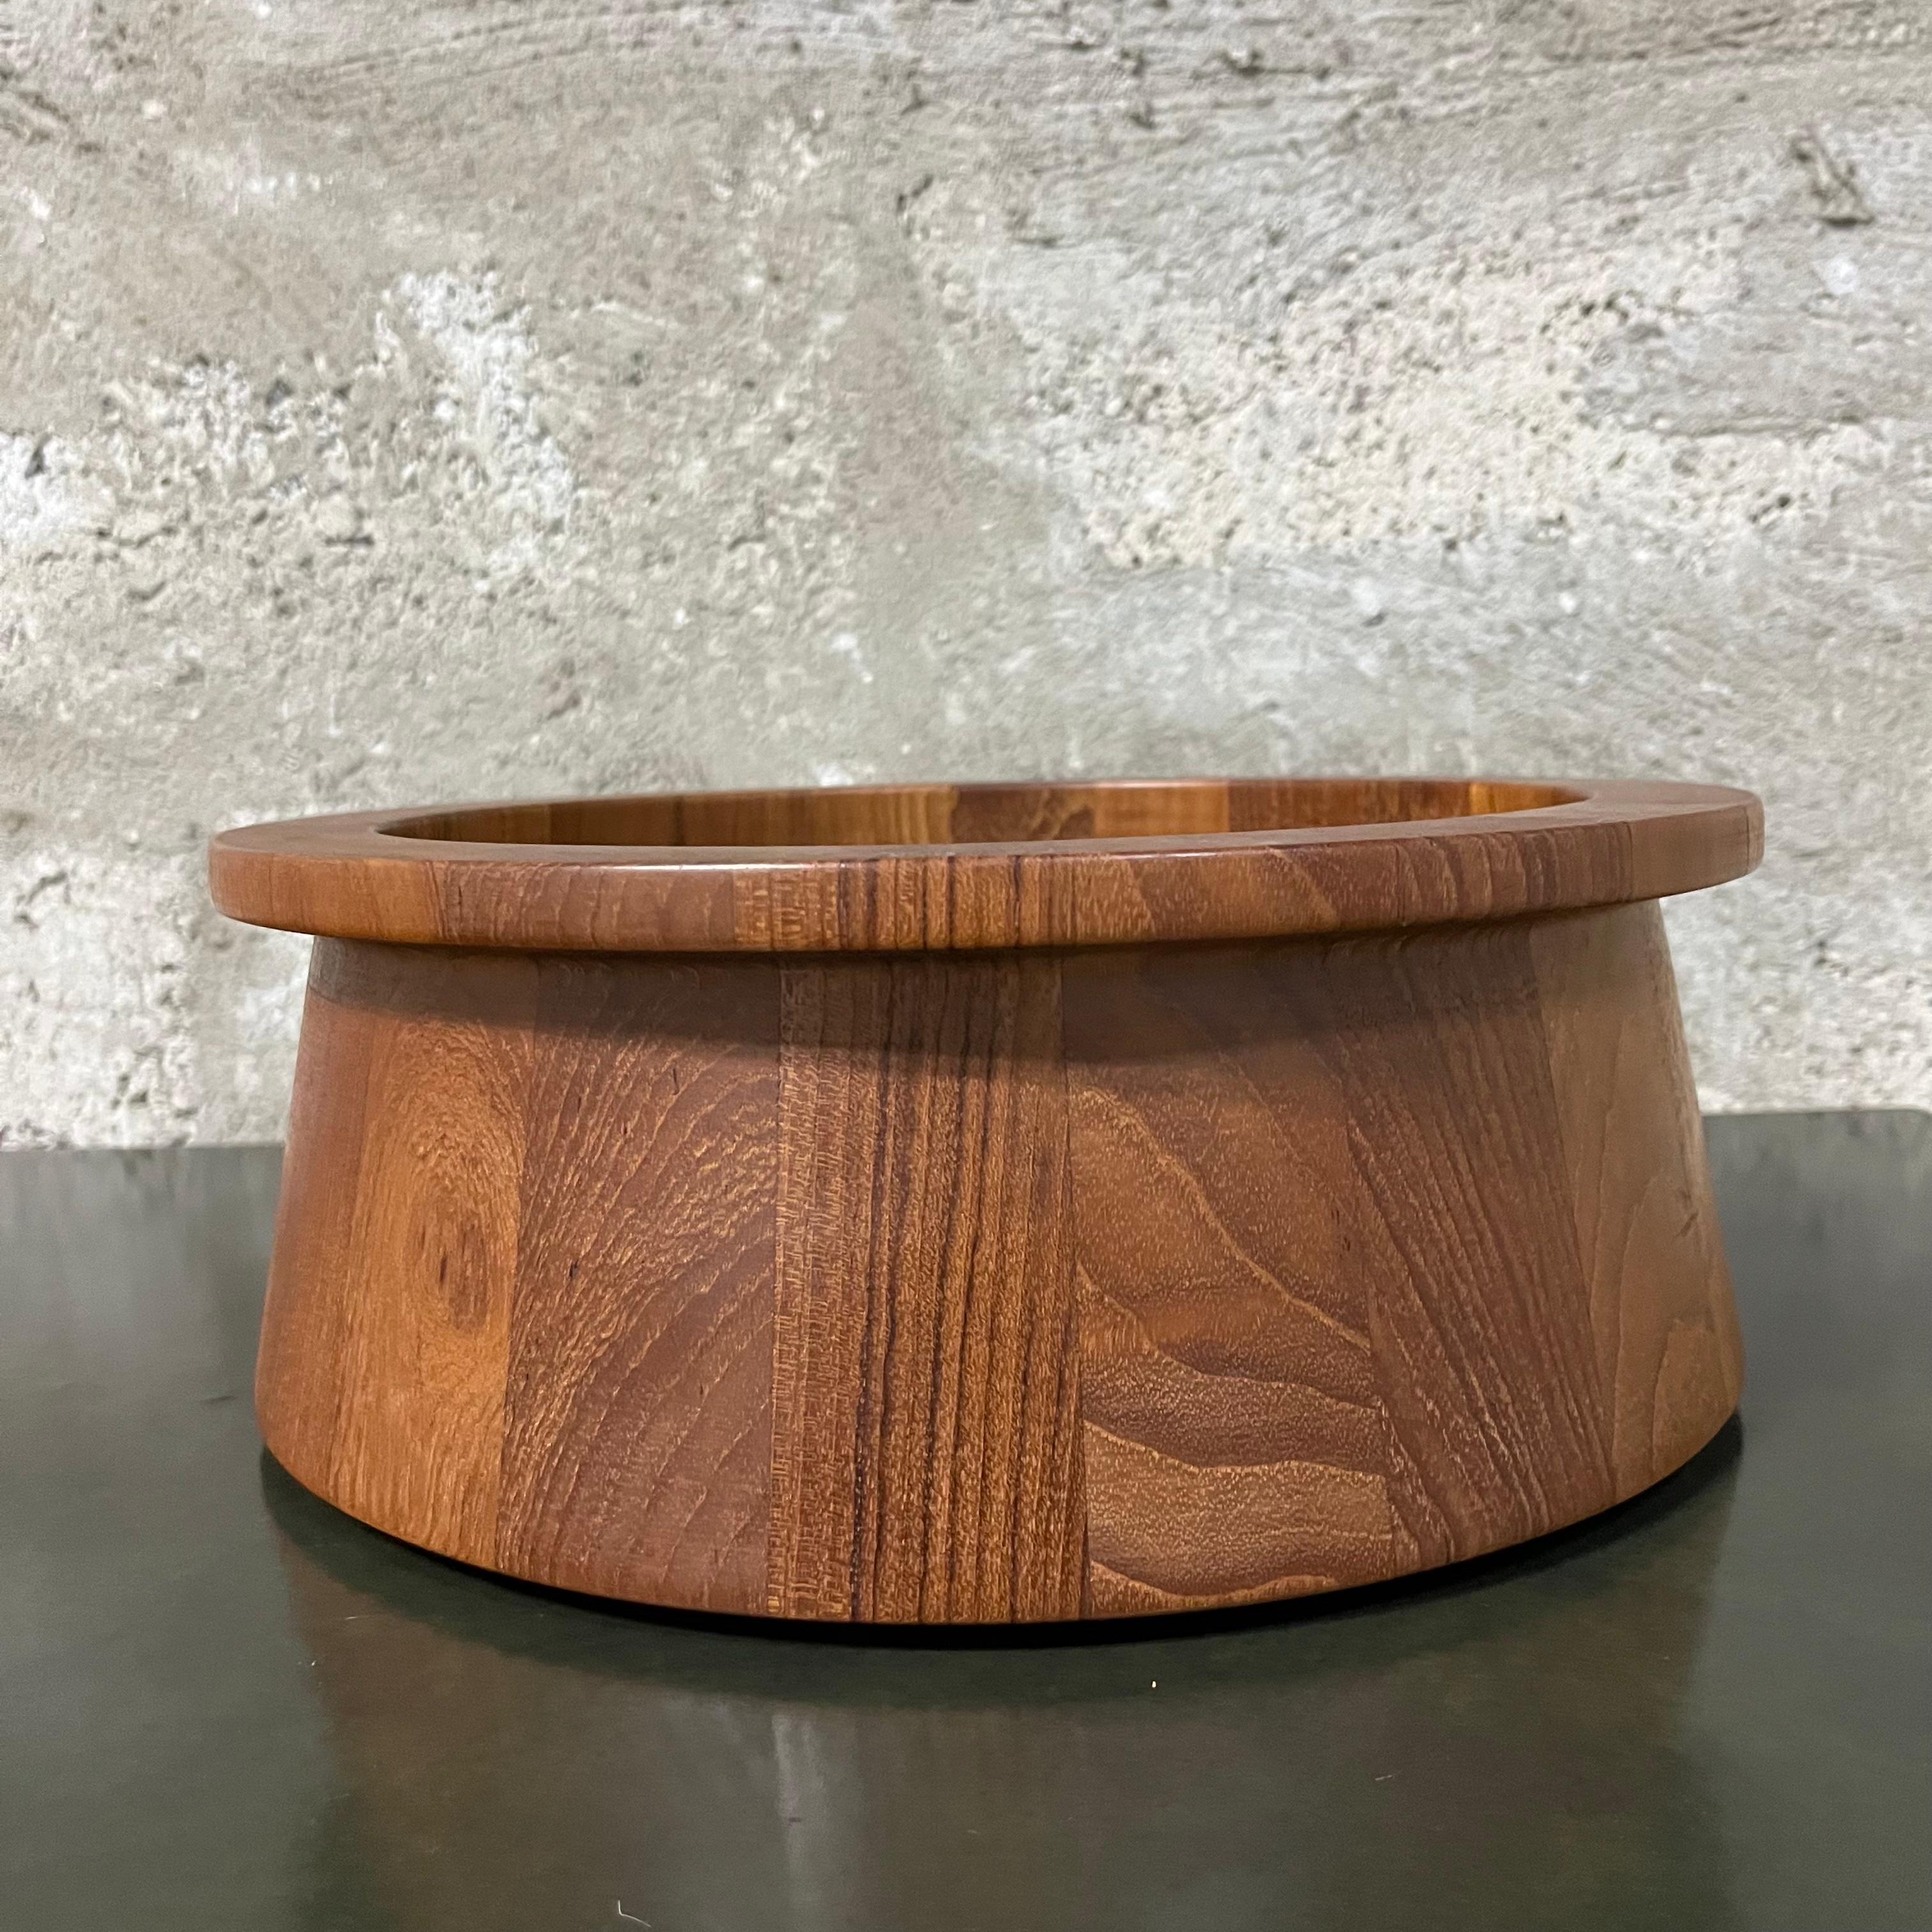 Mid Century Danish Modern Teak Serving Bowl by Jens Quistgaard for Dansk. Circa 1970s 
Features a beautiful staved teak wood construction and a quintessential Mid Century Modern Scandinavian Design.
In excellent original condition with minor signs